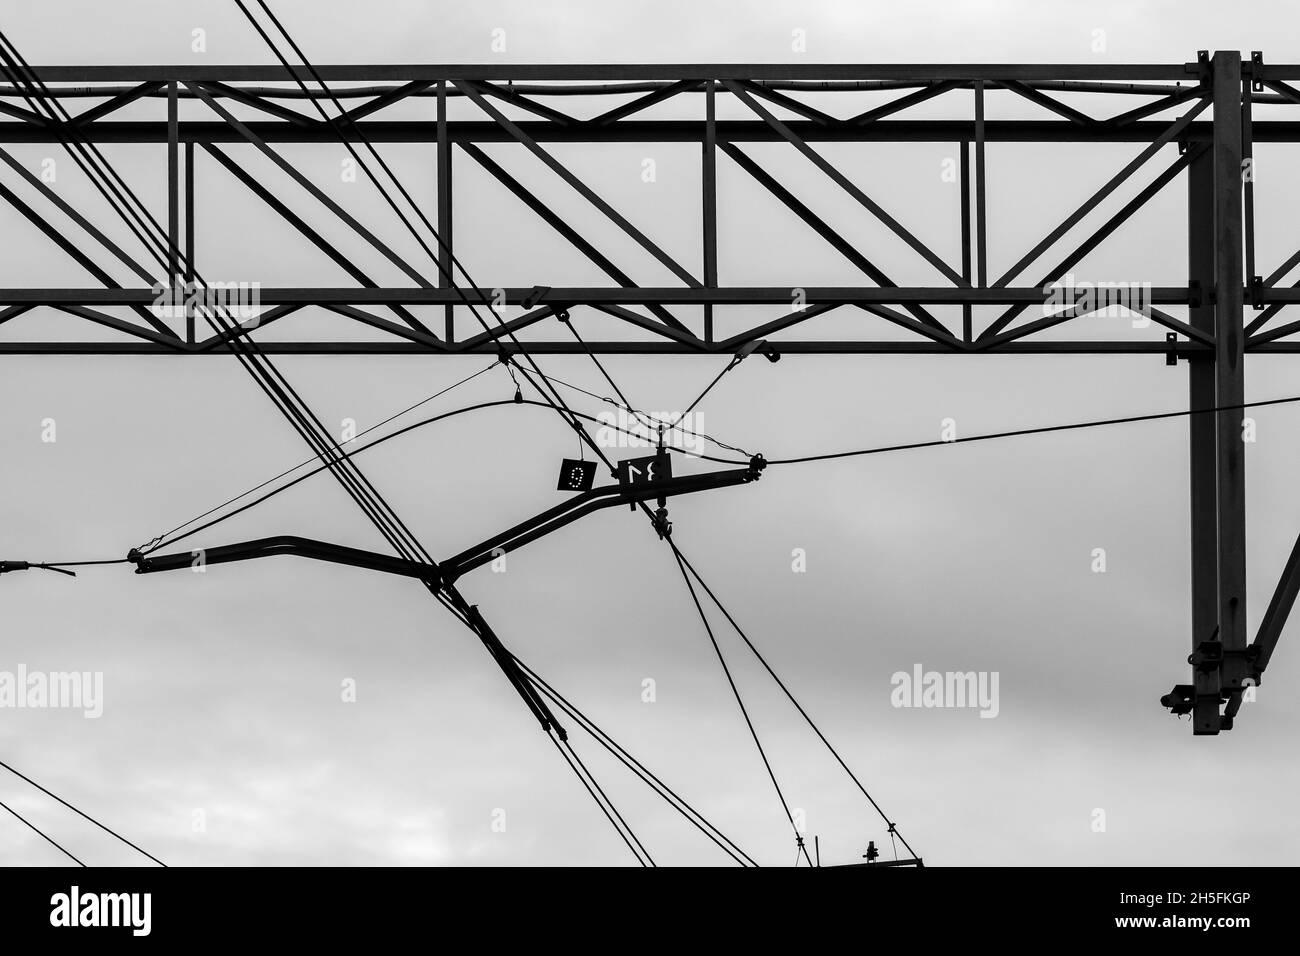 Overhead railway power lines and holding structures under cloudy sky, black and white background photo Stock Photo